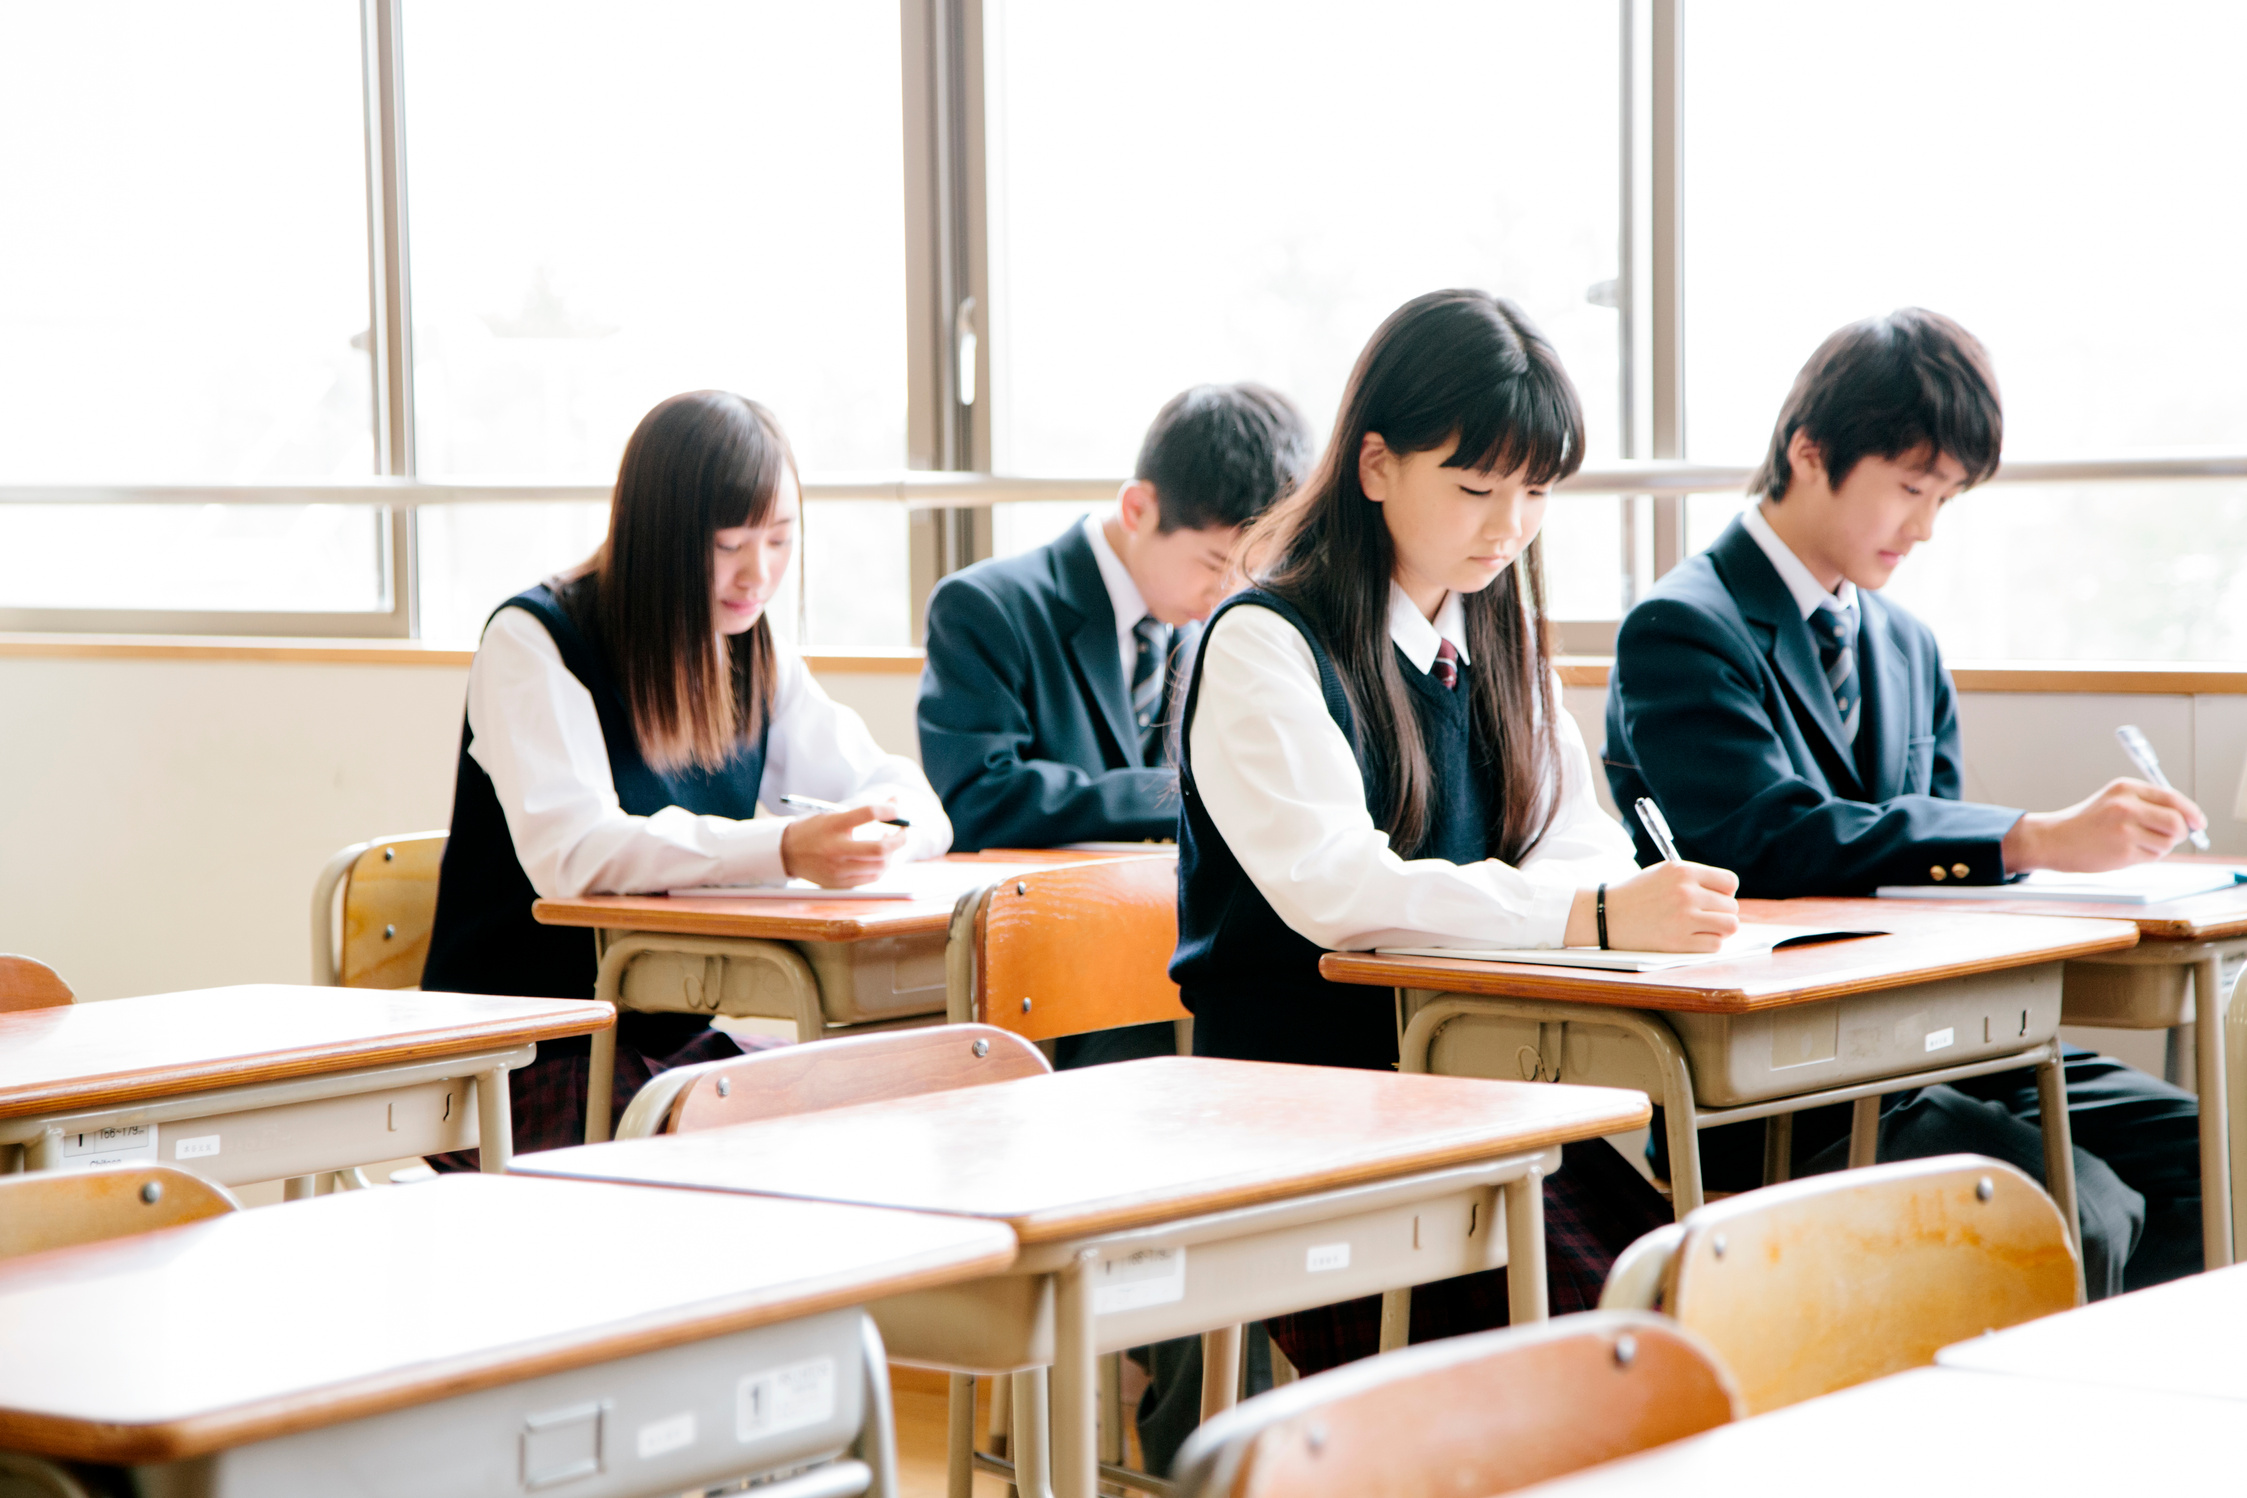 High school students, teenagers studying in a classroom, Japan